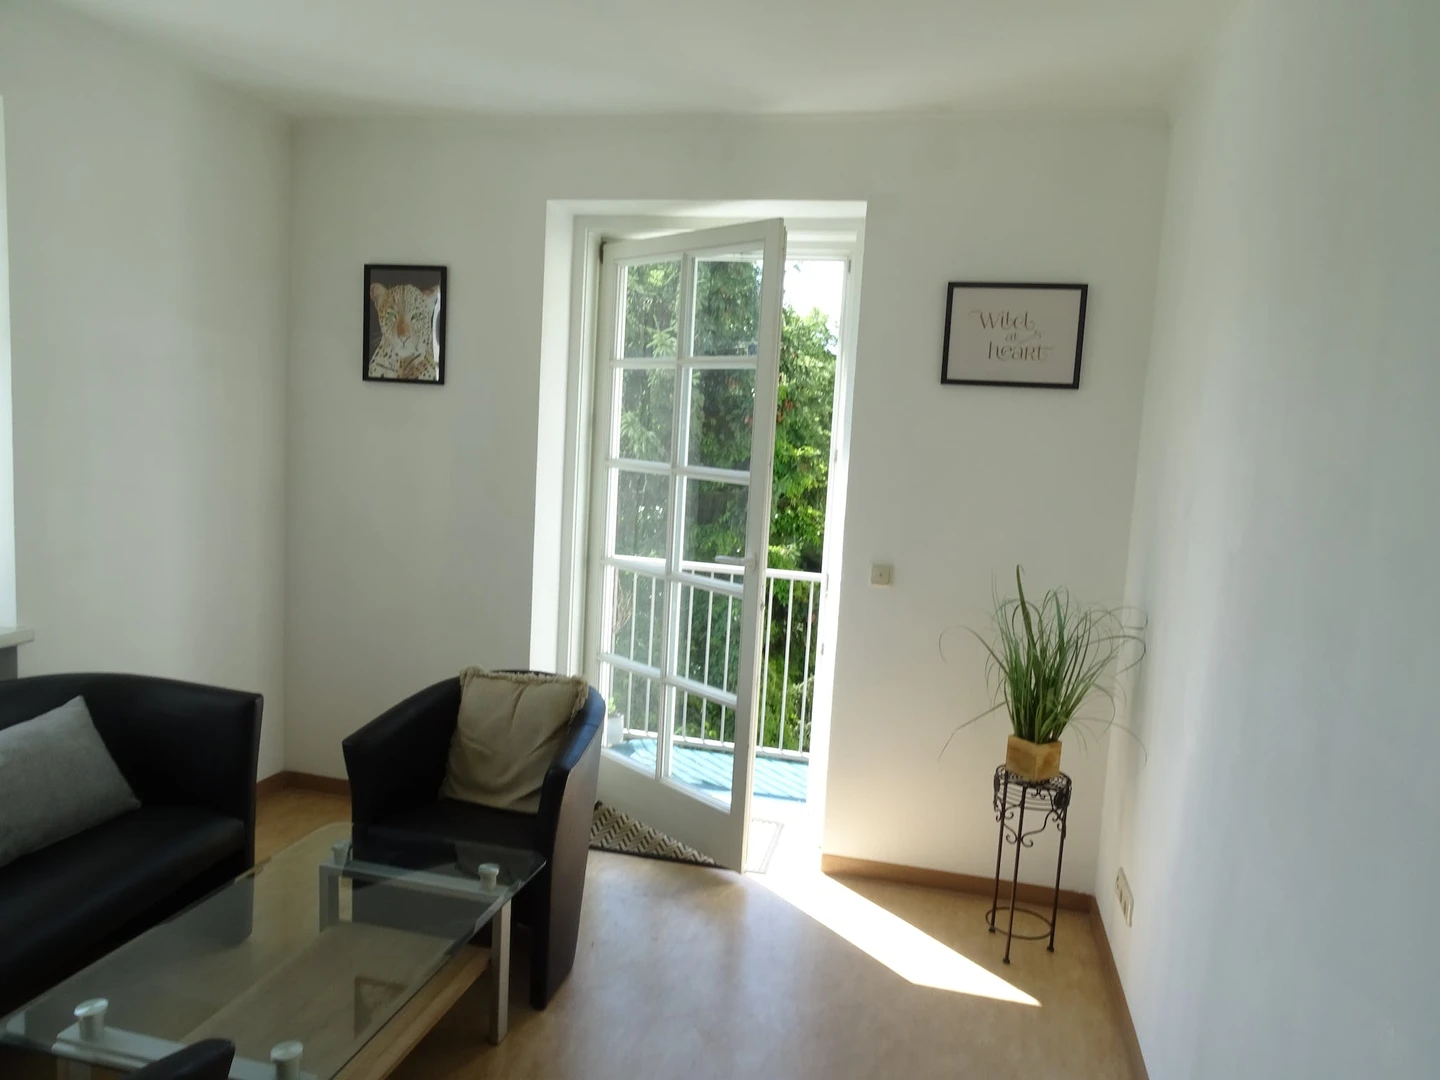 Renting rooms by the month in Salzburg